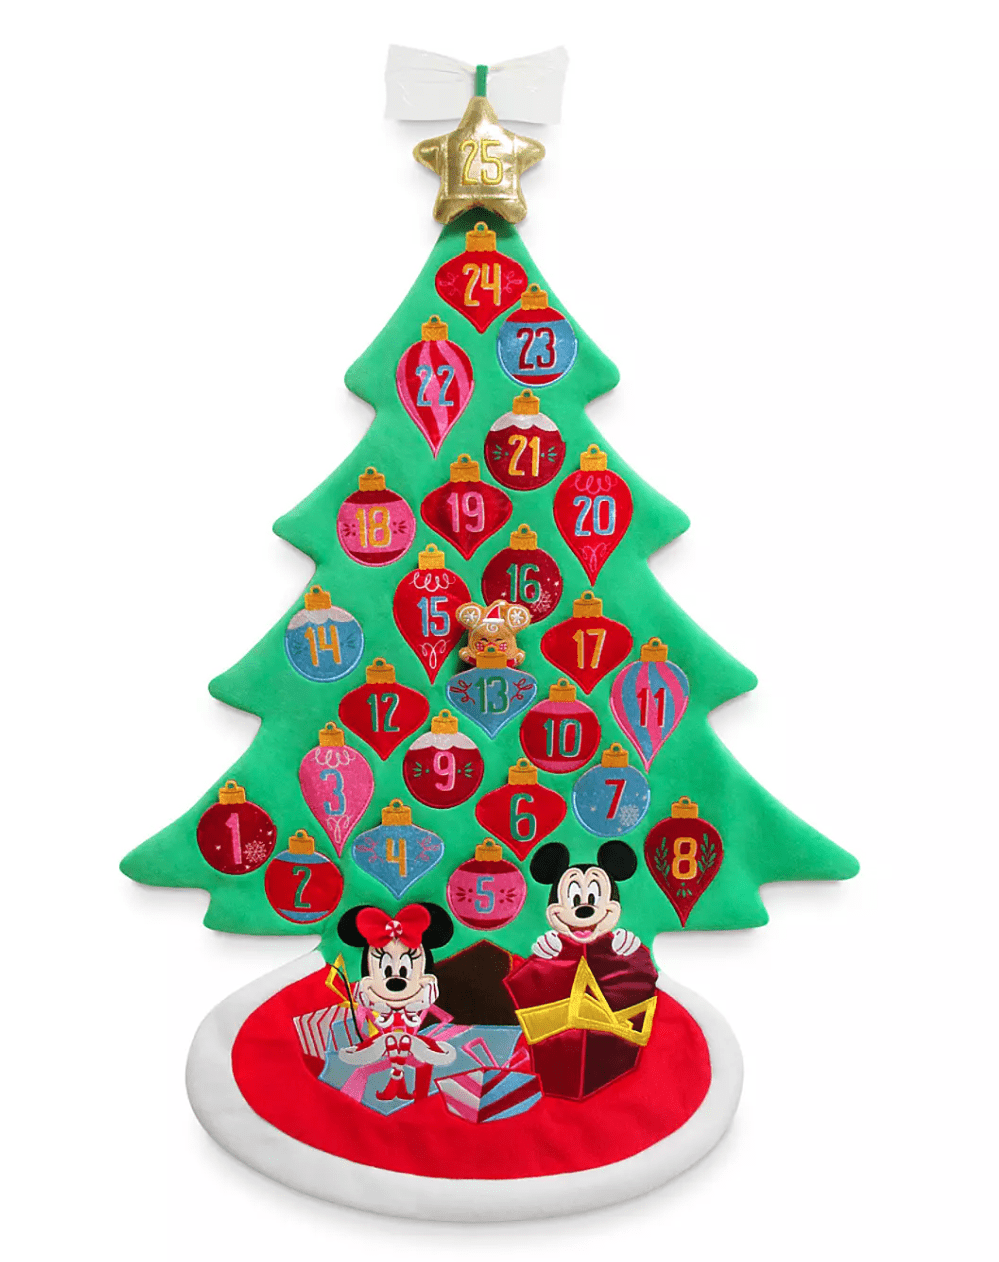 You Can Get A Mickey and Minnie Mouse Advent Calendar That Hangs On The